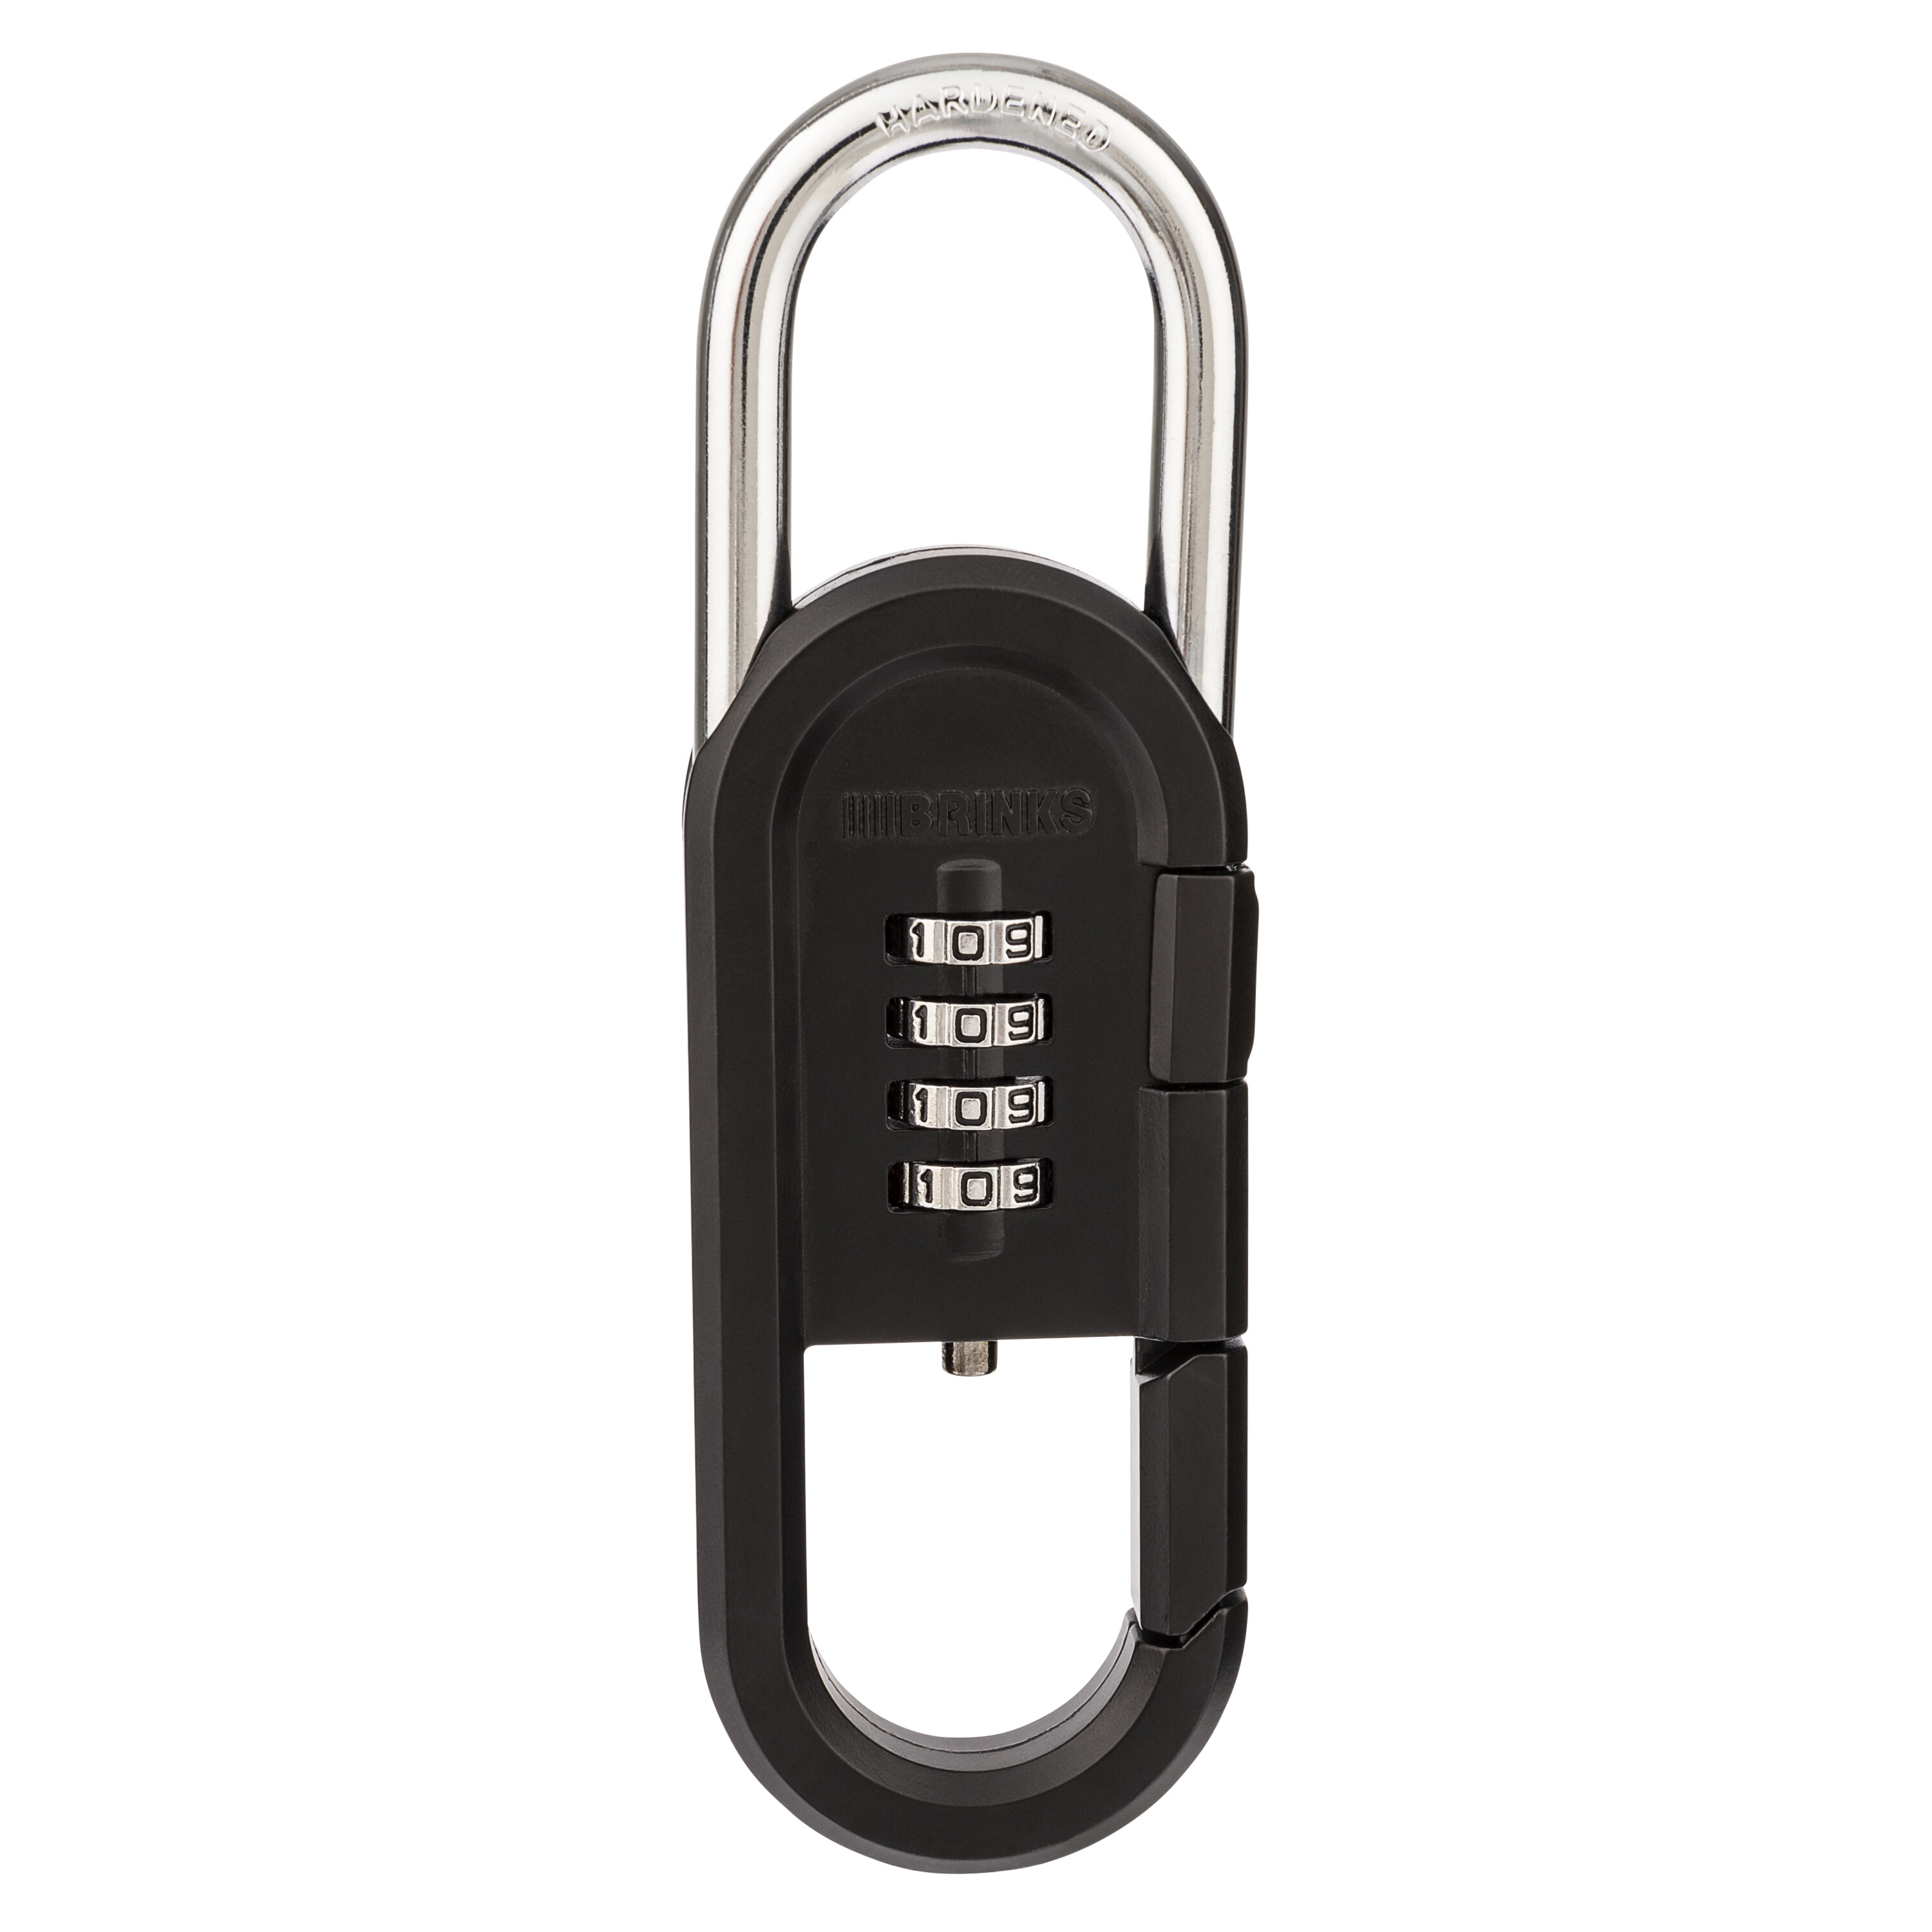 40mm 4-Dial Resettable Sports Padlock with Carabiner Clip